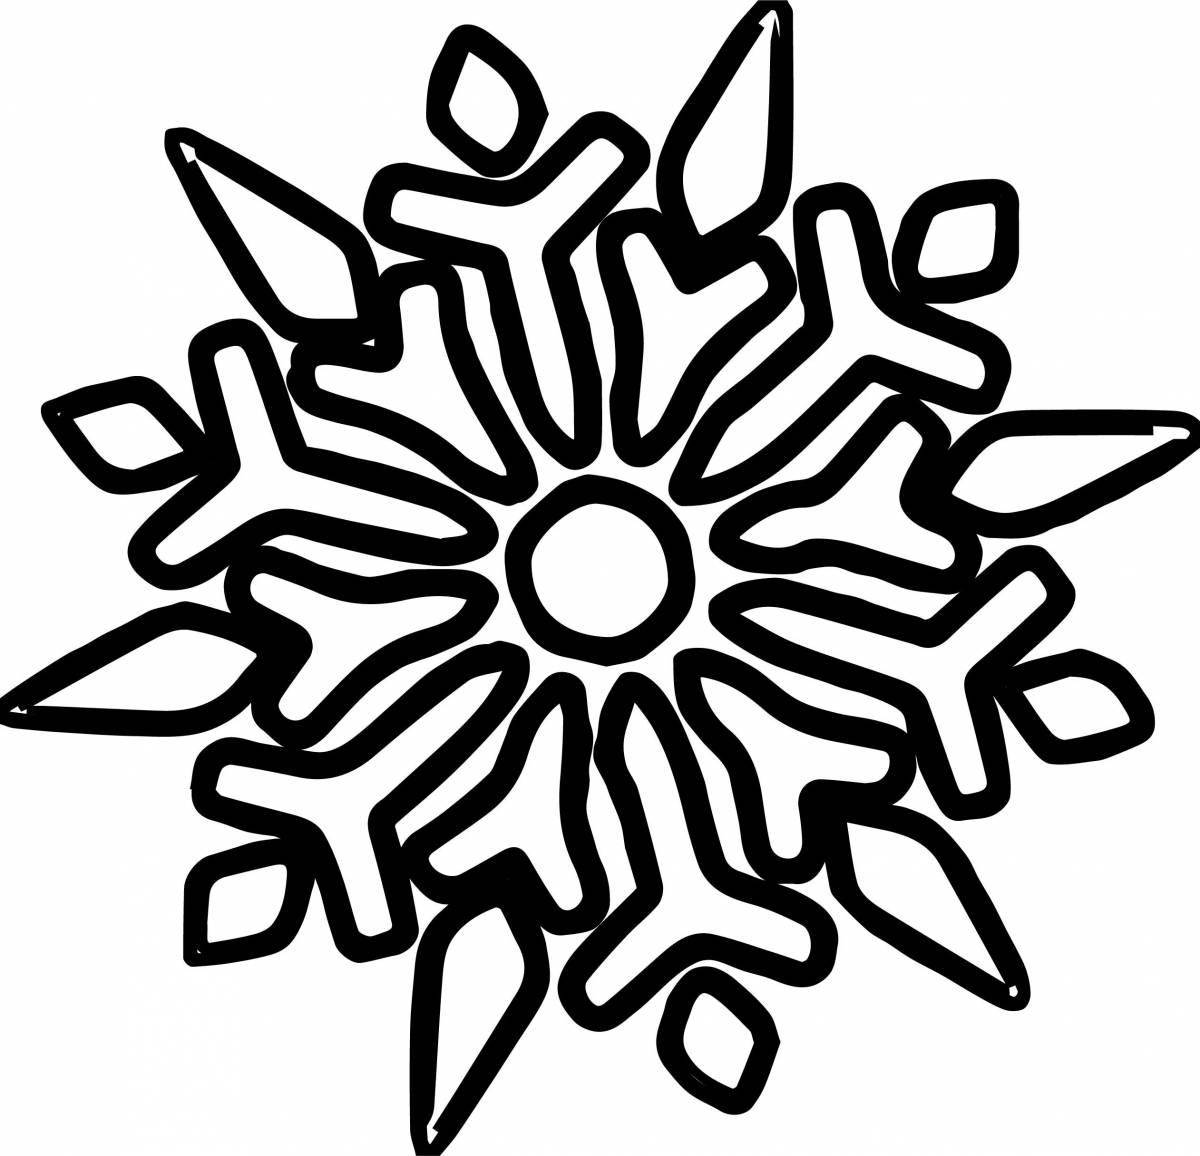 Bright snowflake coloring book for kids